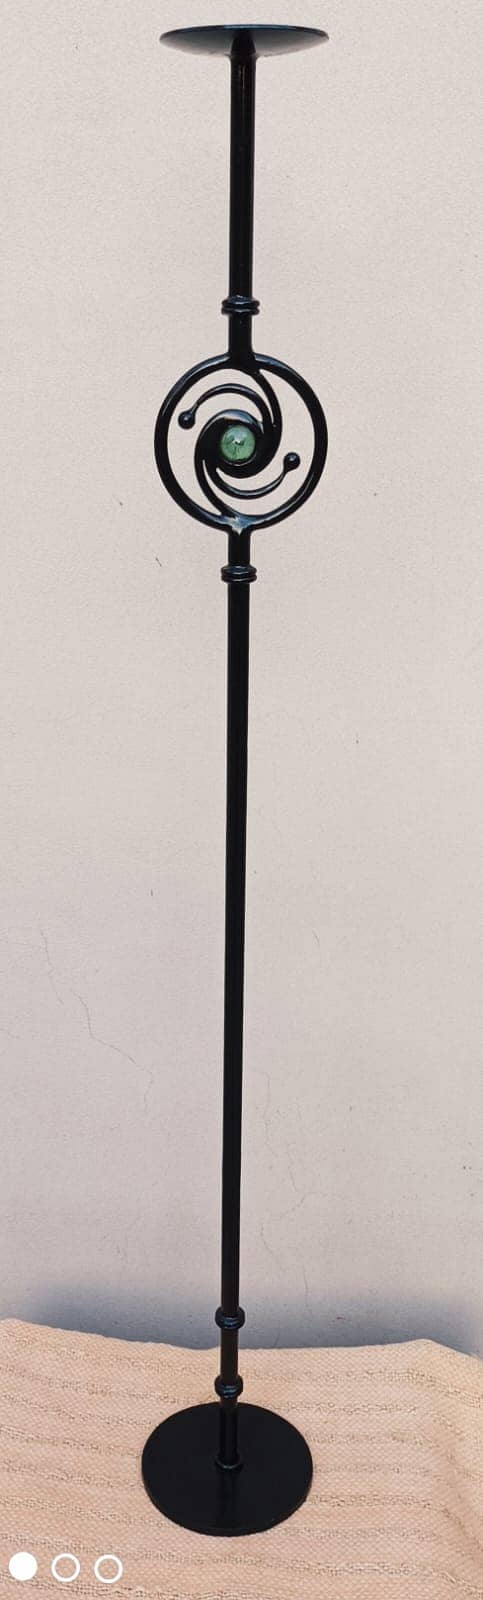 Steel / Wrought Iron Candle Stands on sale 4